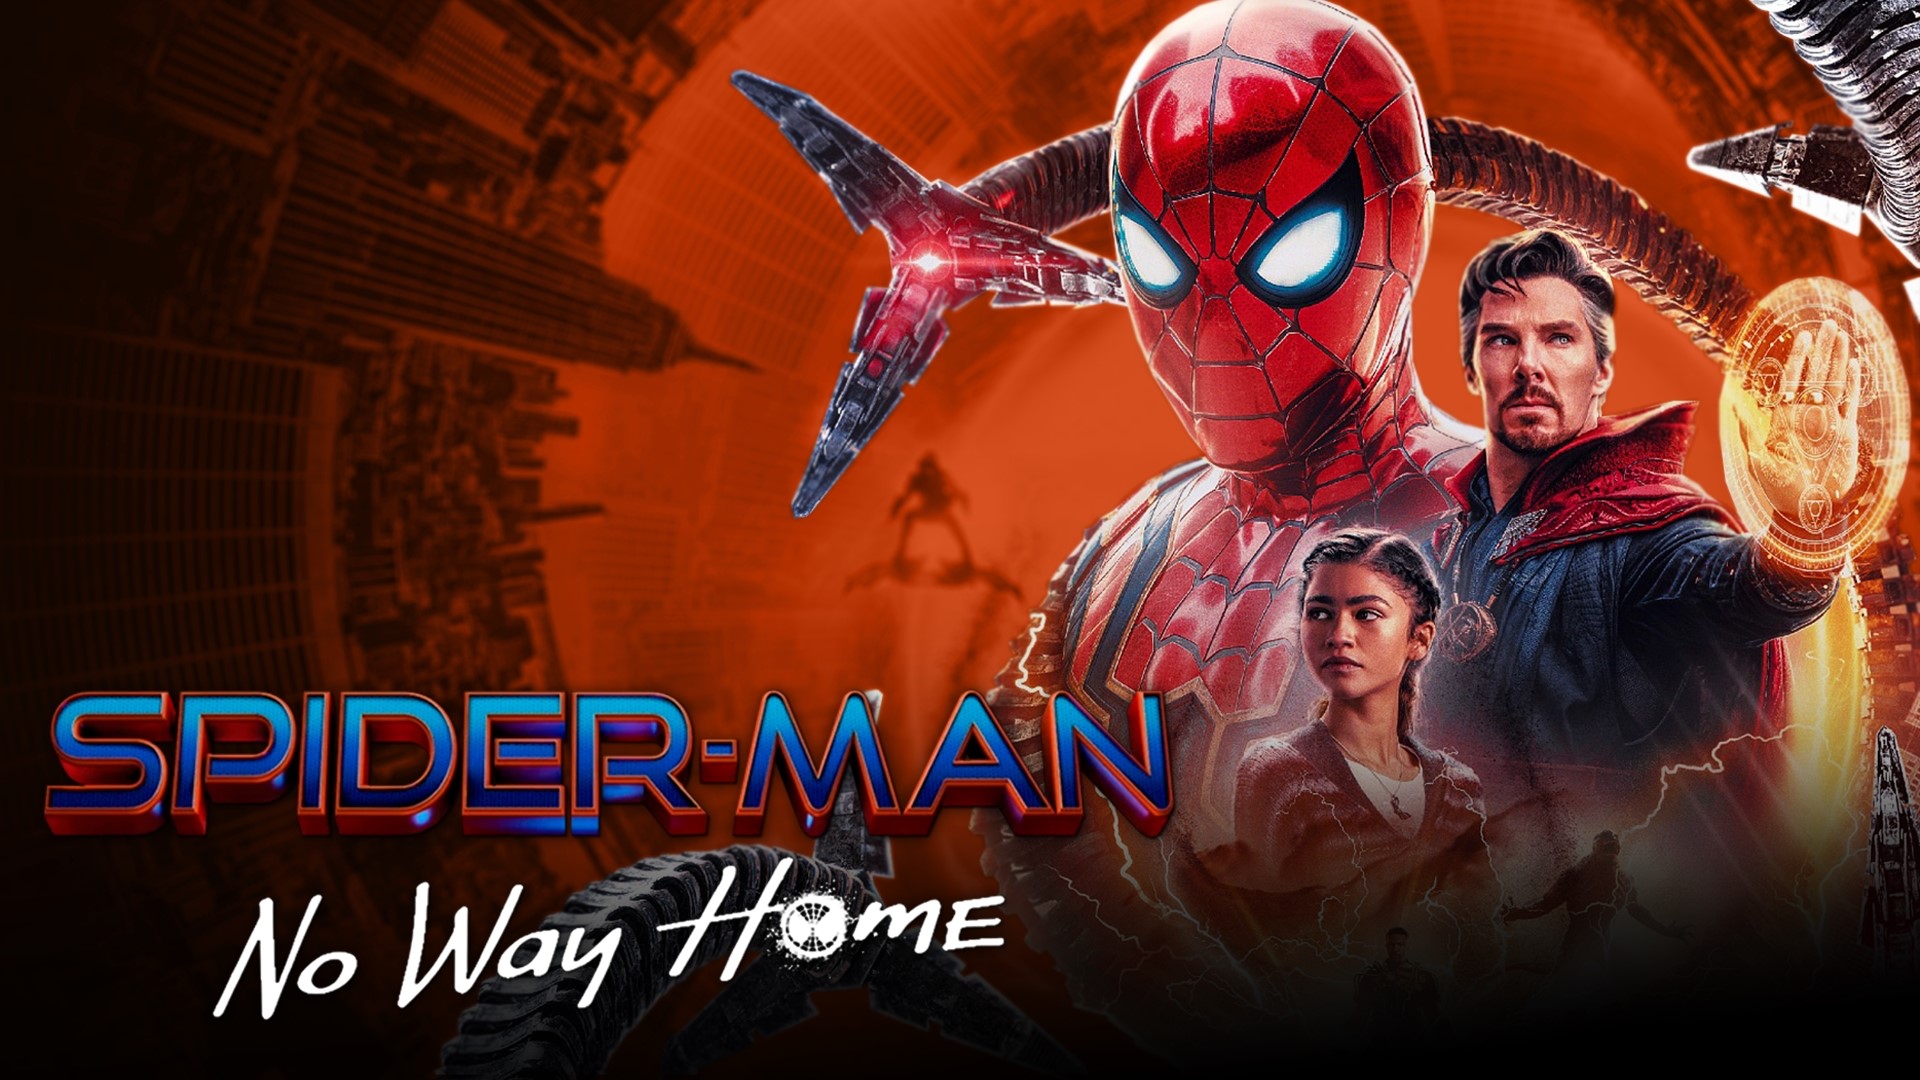 Spider-Man: No Way Home expertly uses nostalgia (and great villains) to weave an amazing journey for Peter Parker.